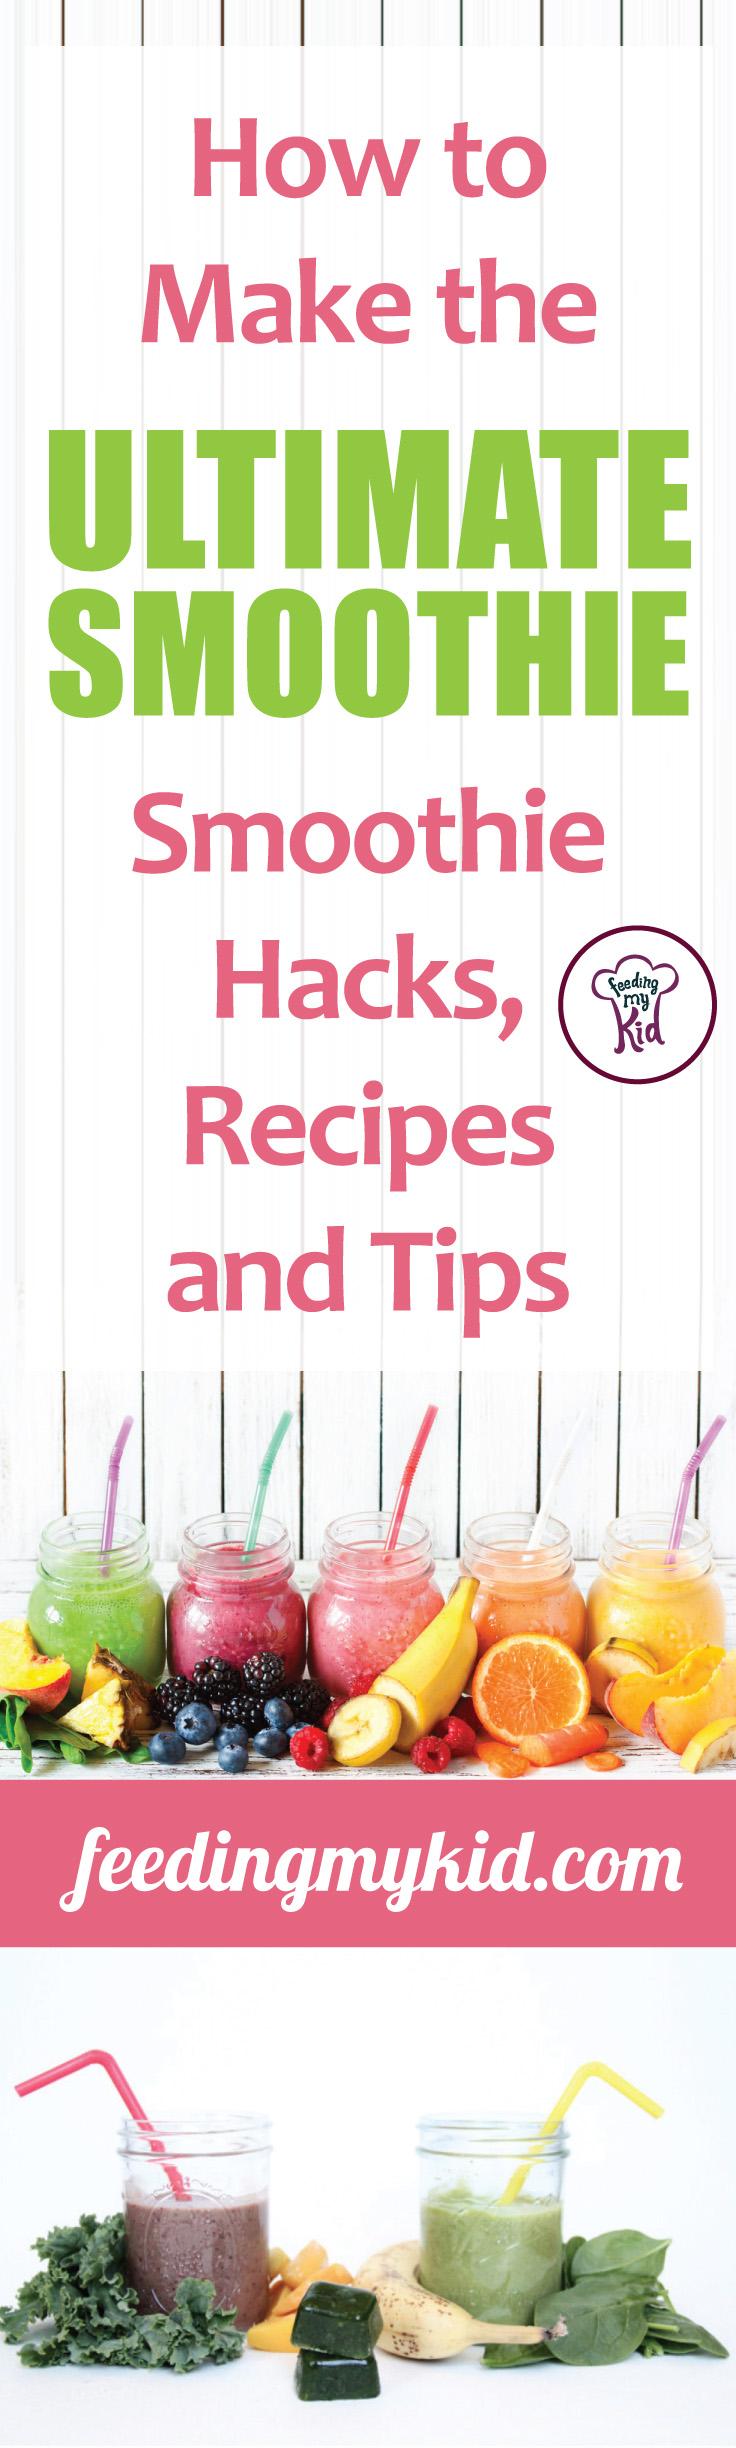 How to Make the Ultimate Smoothie. Smoothie Hacks, Recipes and Tips